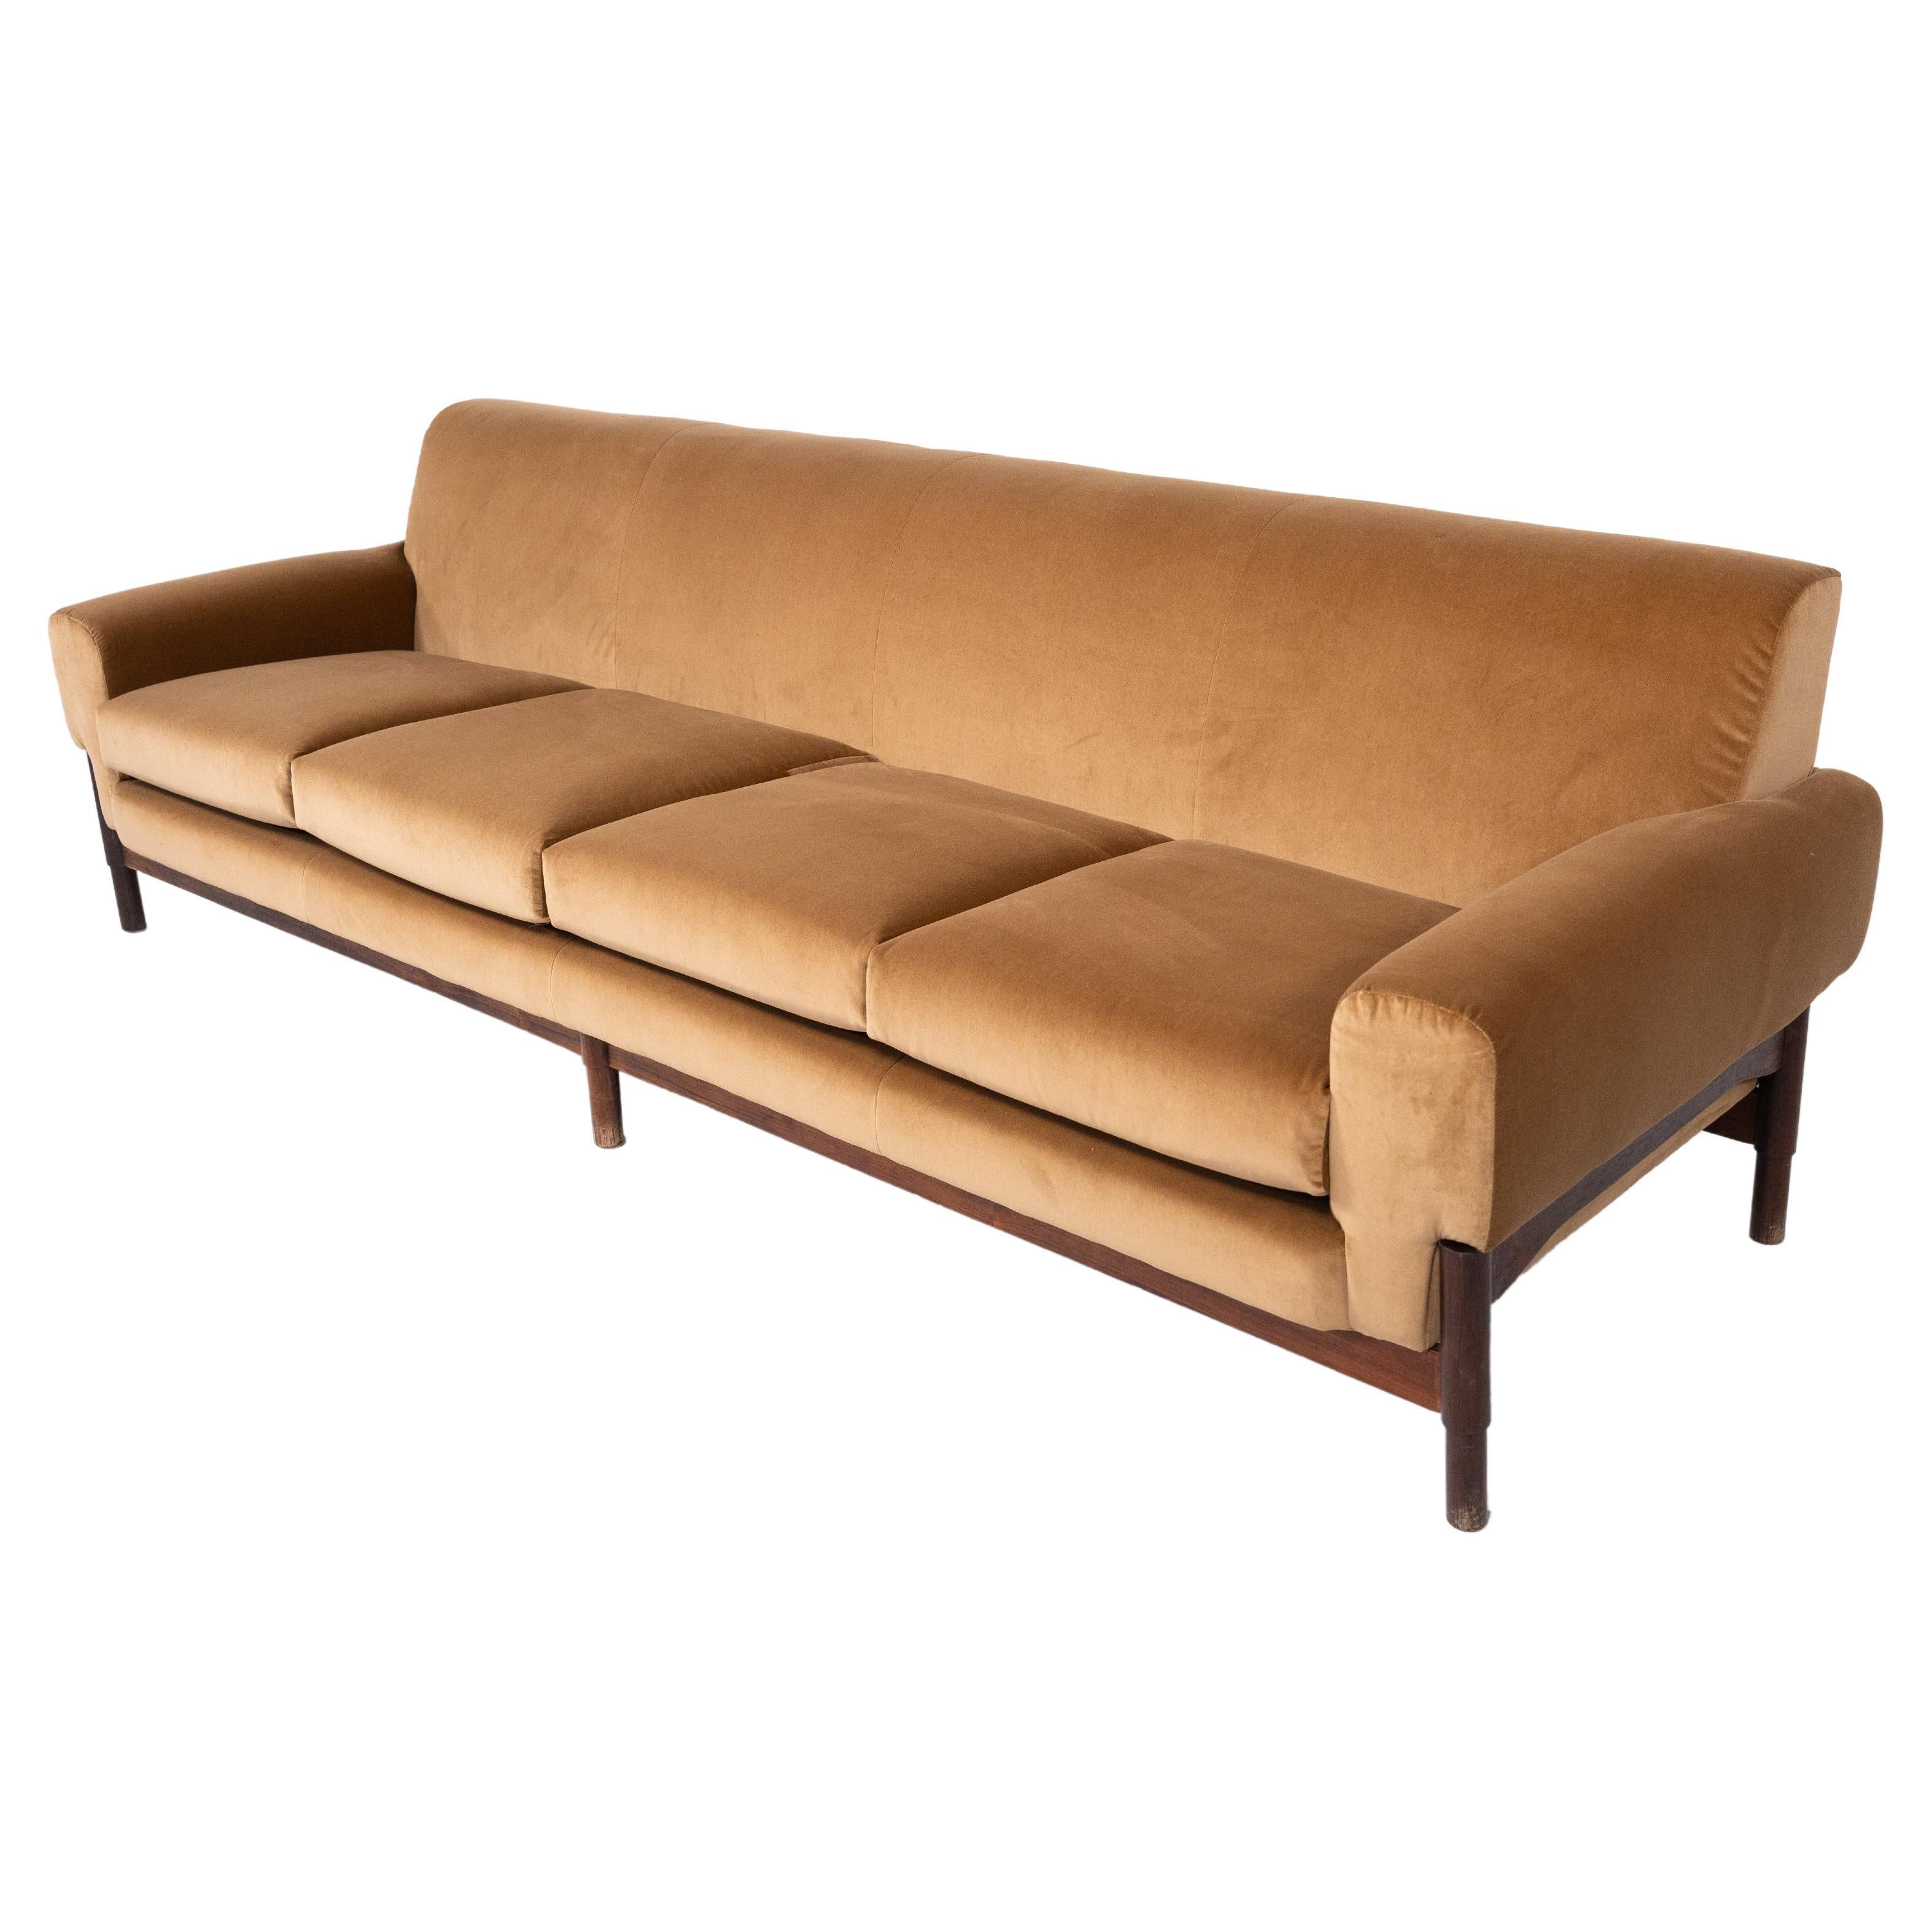 Mid-Century Four Seater Sofa by Saporiti, Italy, 1960s - New Upholstery For Sale